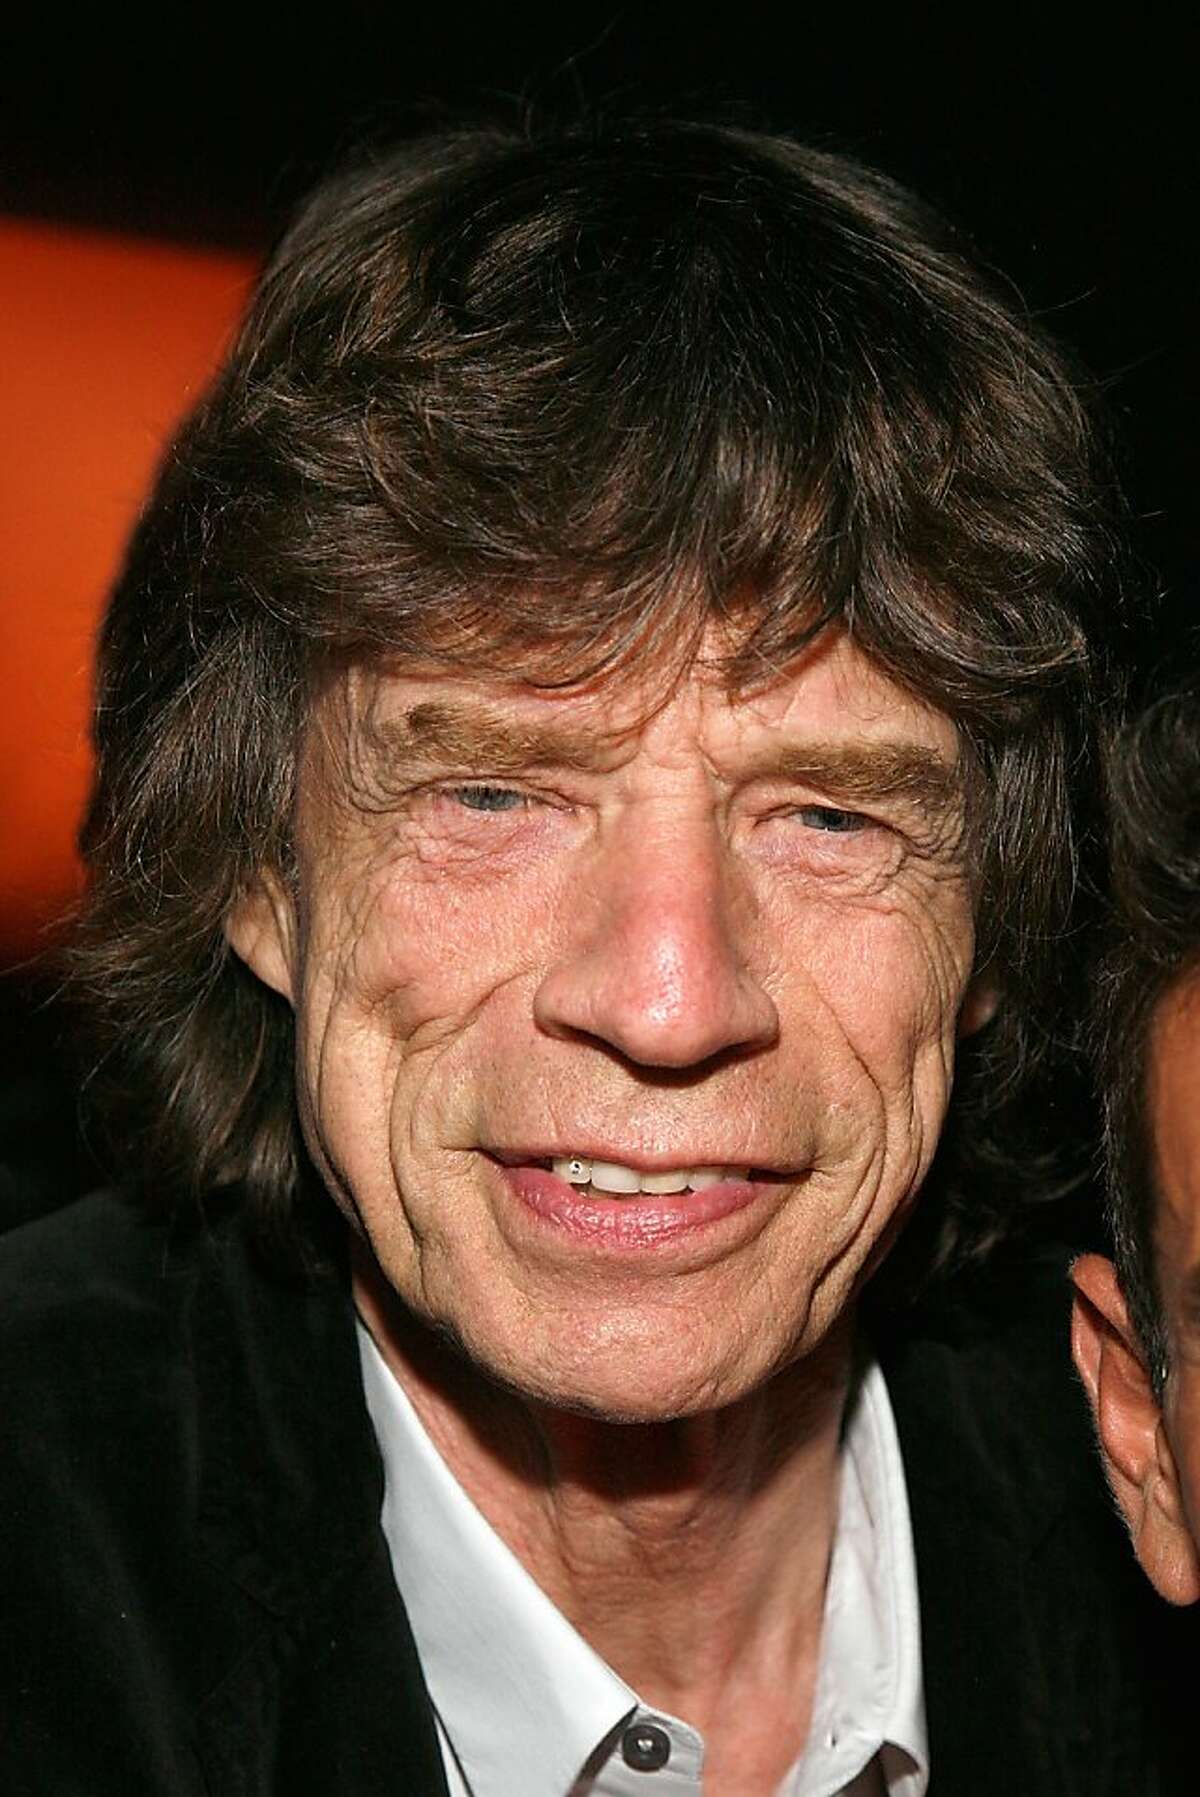 Mick Jagger gives fans what they need